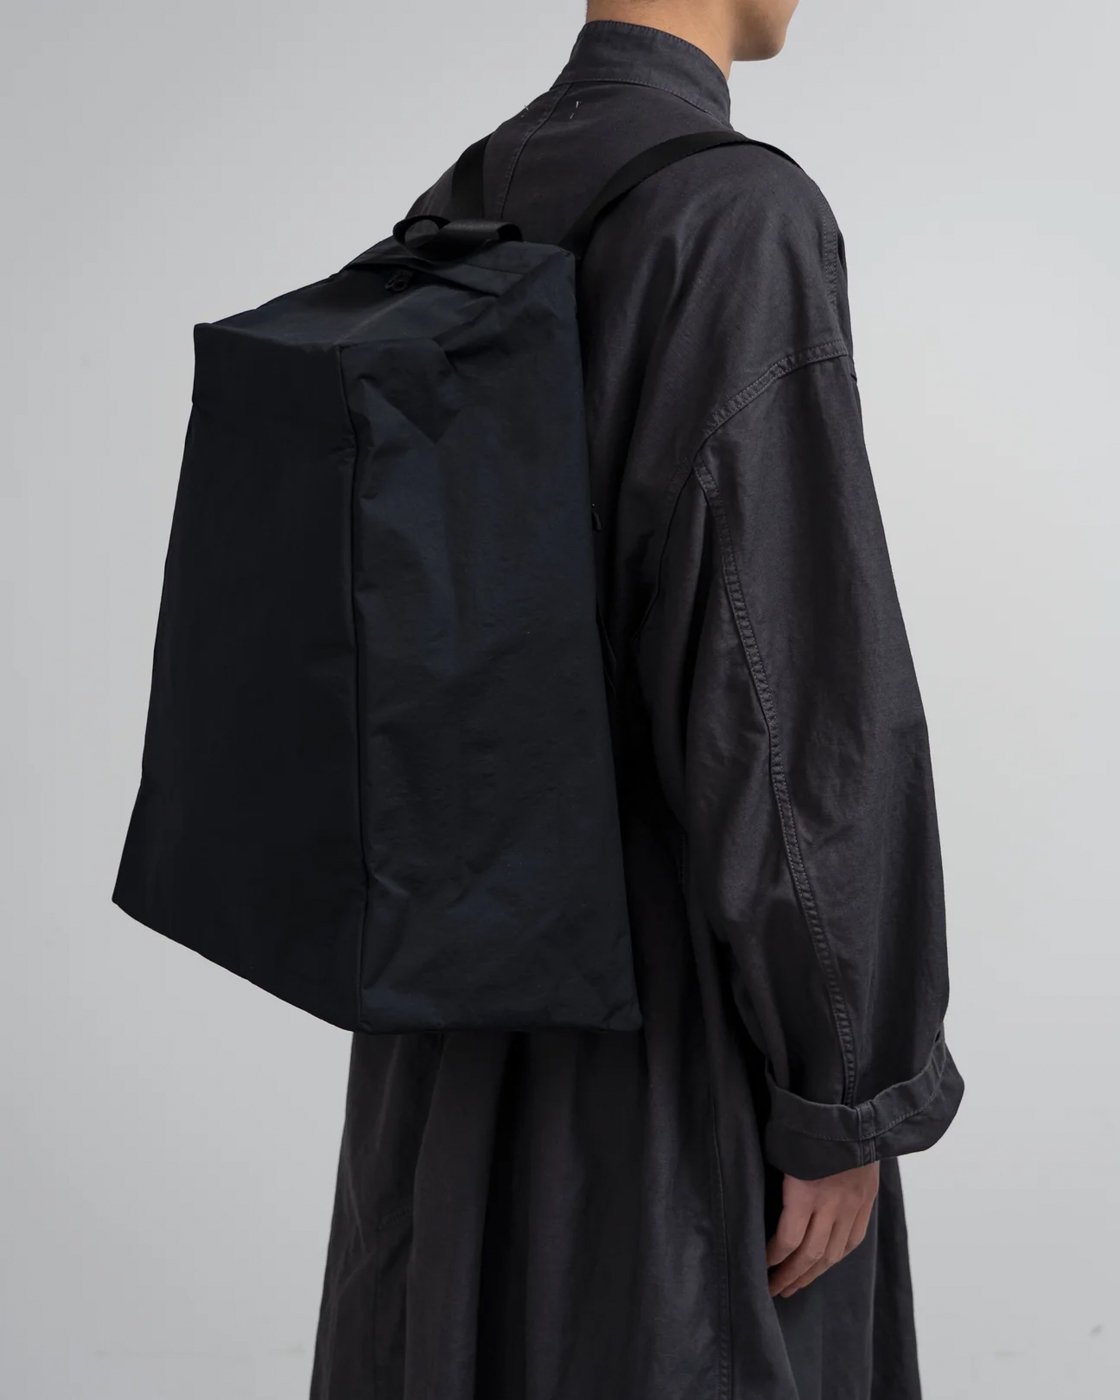 Graphpaper * Blankof for GP Back Pack ”TRAPEZOID” * Black